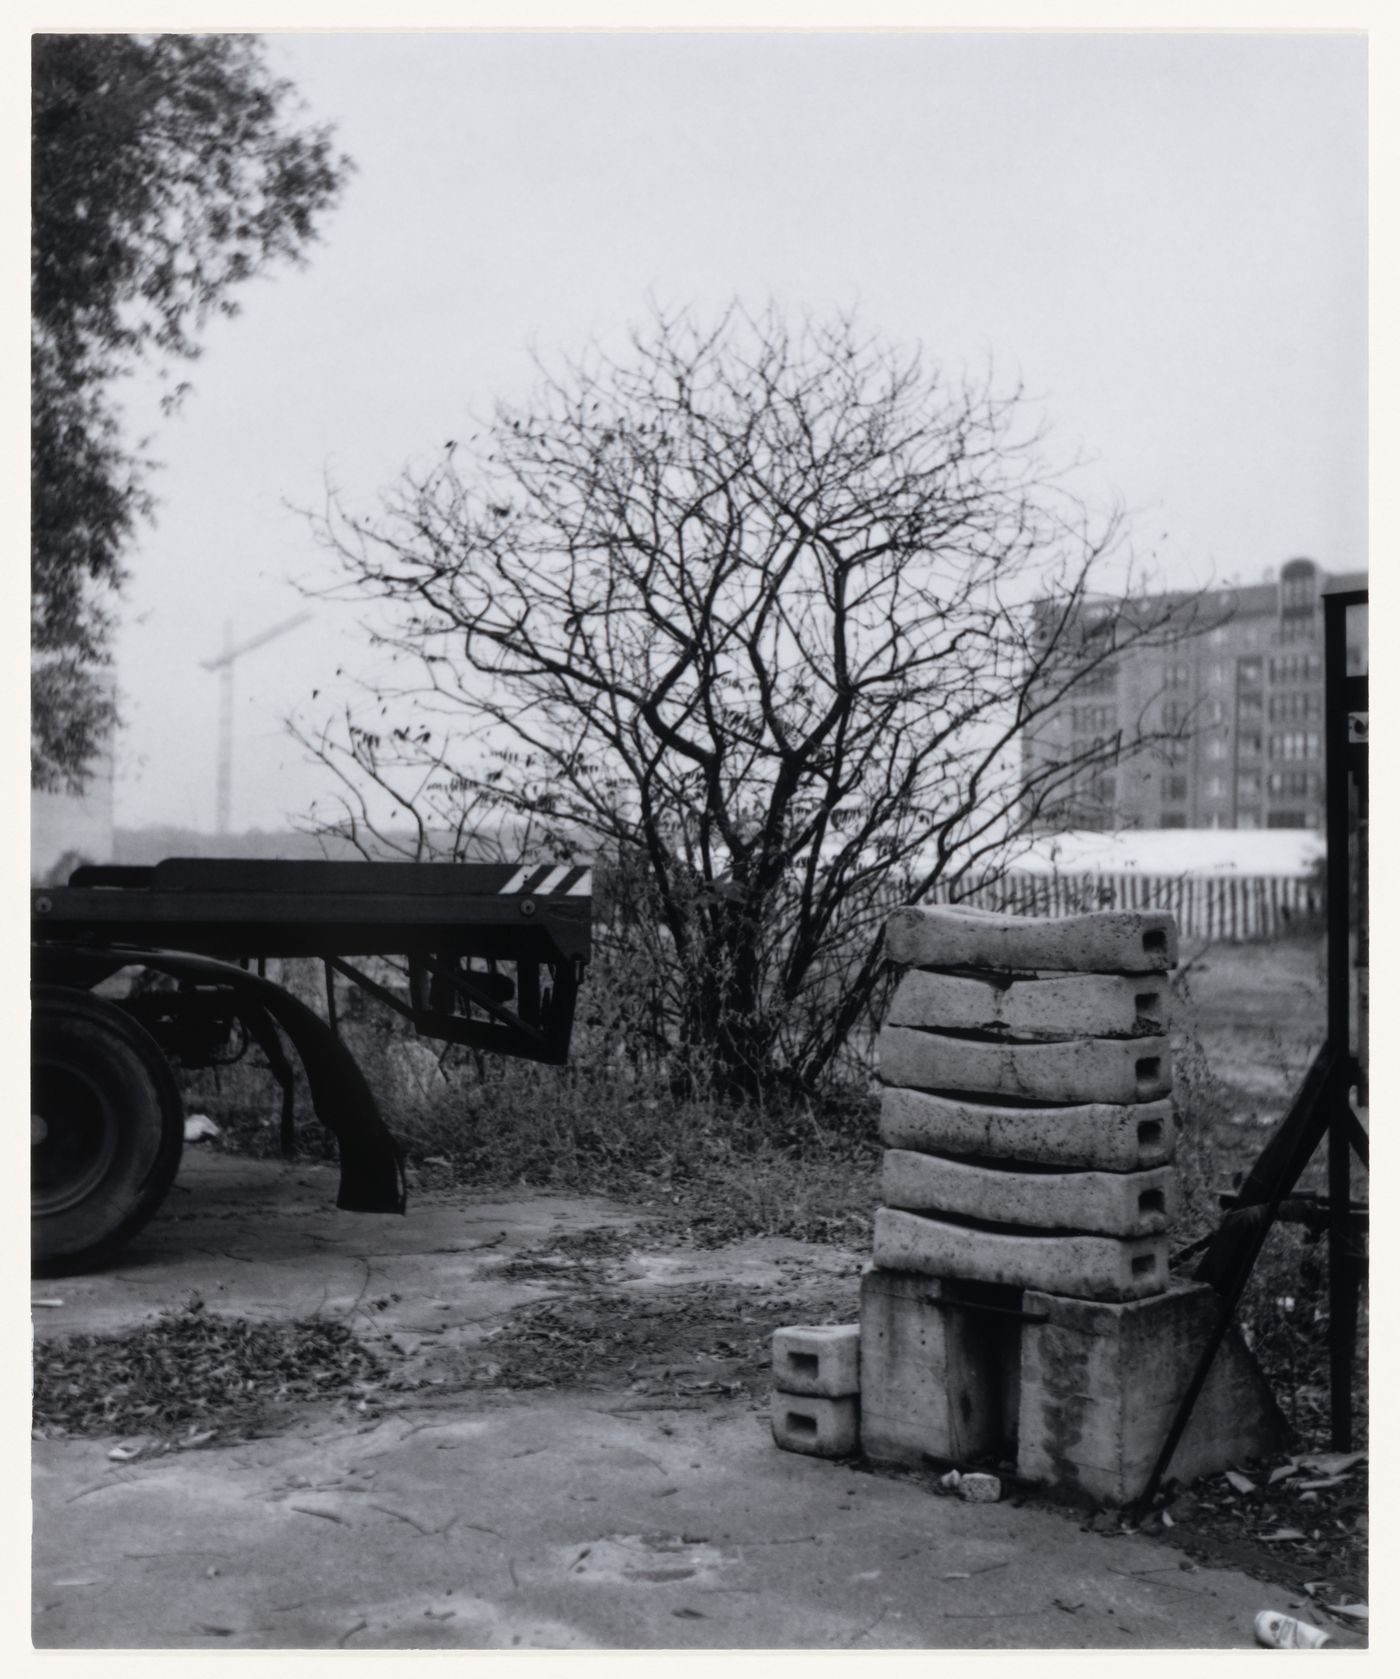 View of building materials, trees and the back of a truck showing a building in the background, Berlin, Germany, from the artist book "The Potsdamer Project"